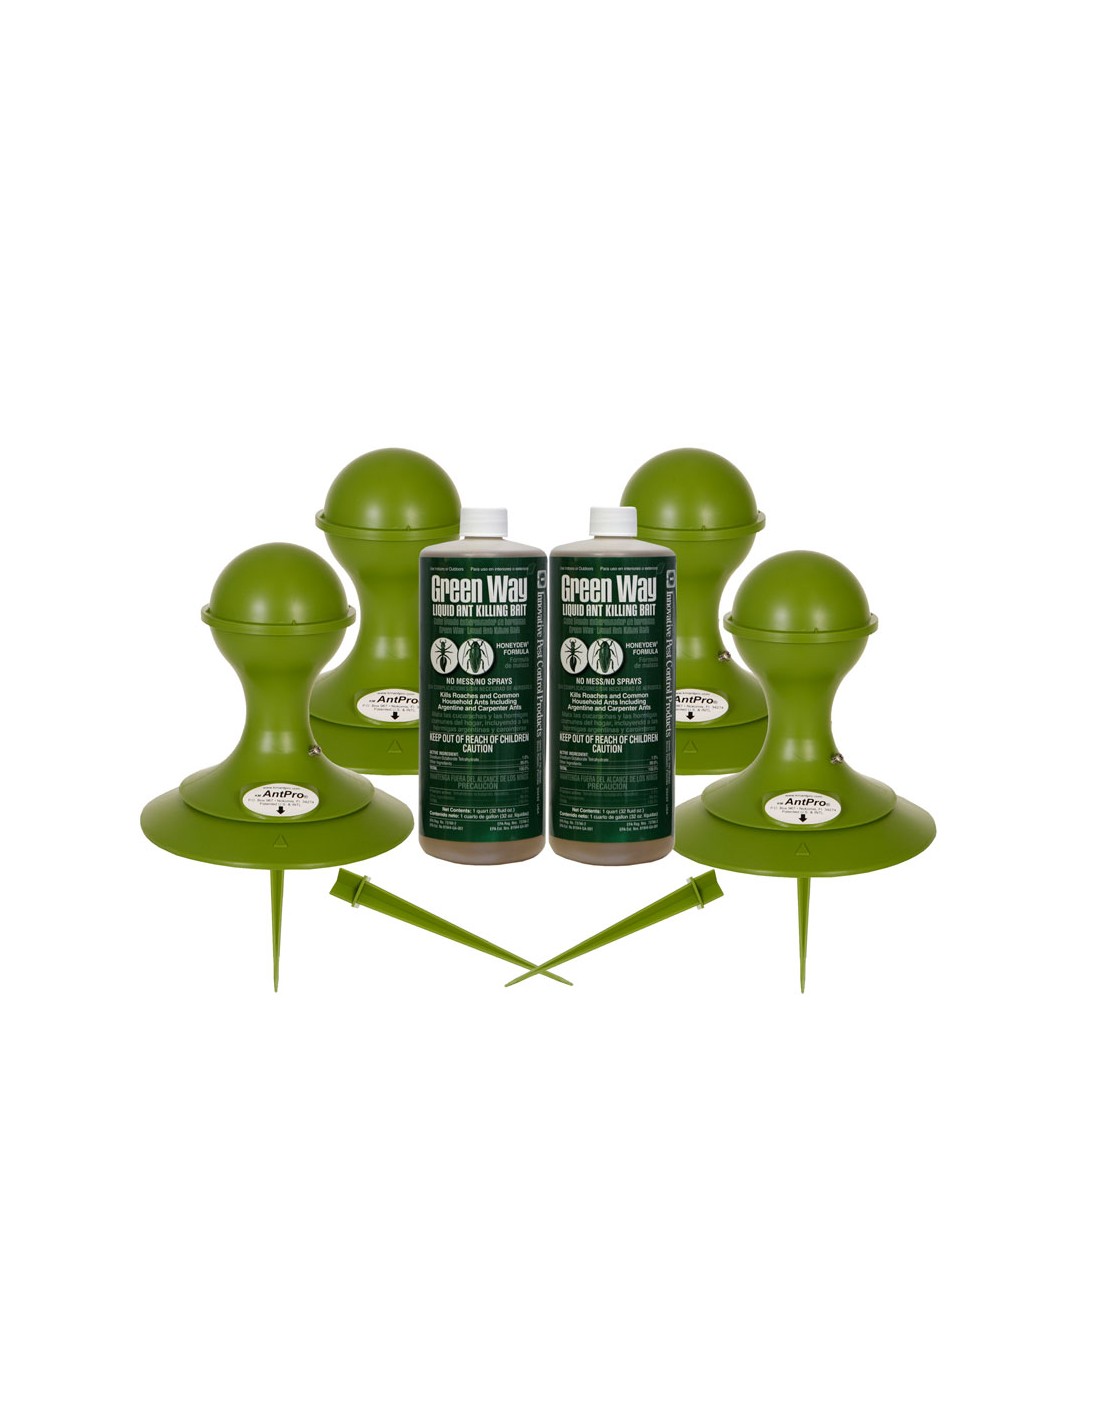 what is the ingredient in green way liquid ant killer?  can I use Terro liquid in the KM ant pro dispensor?